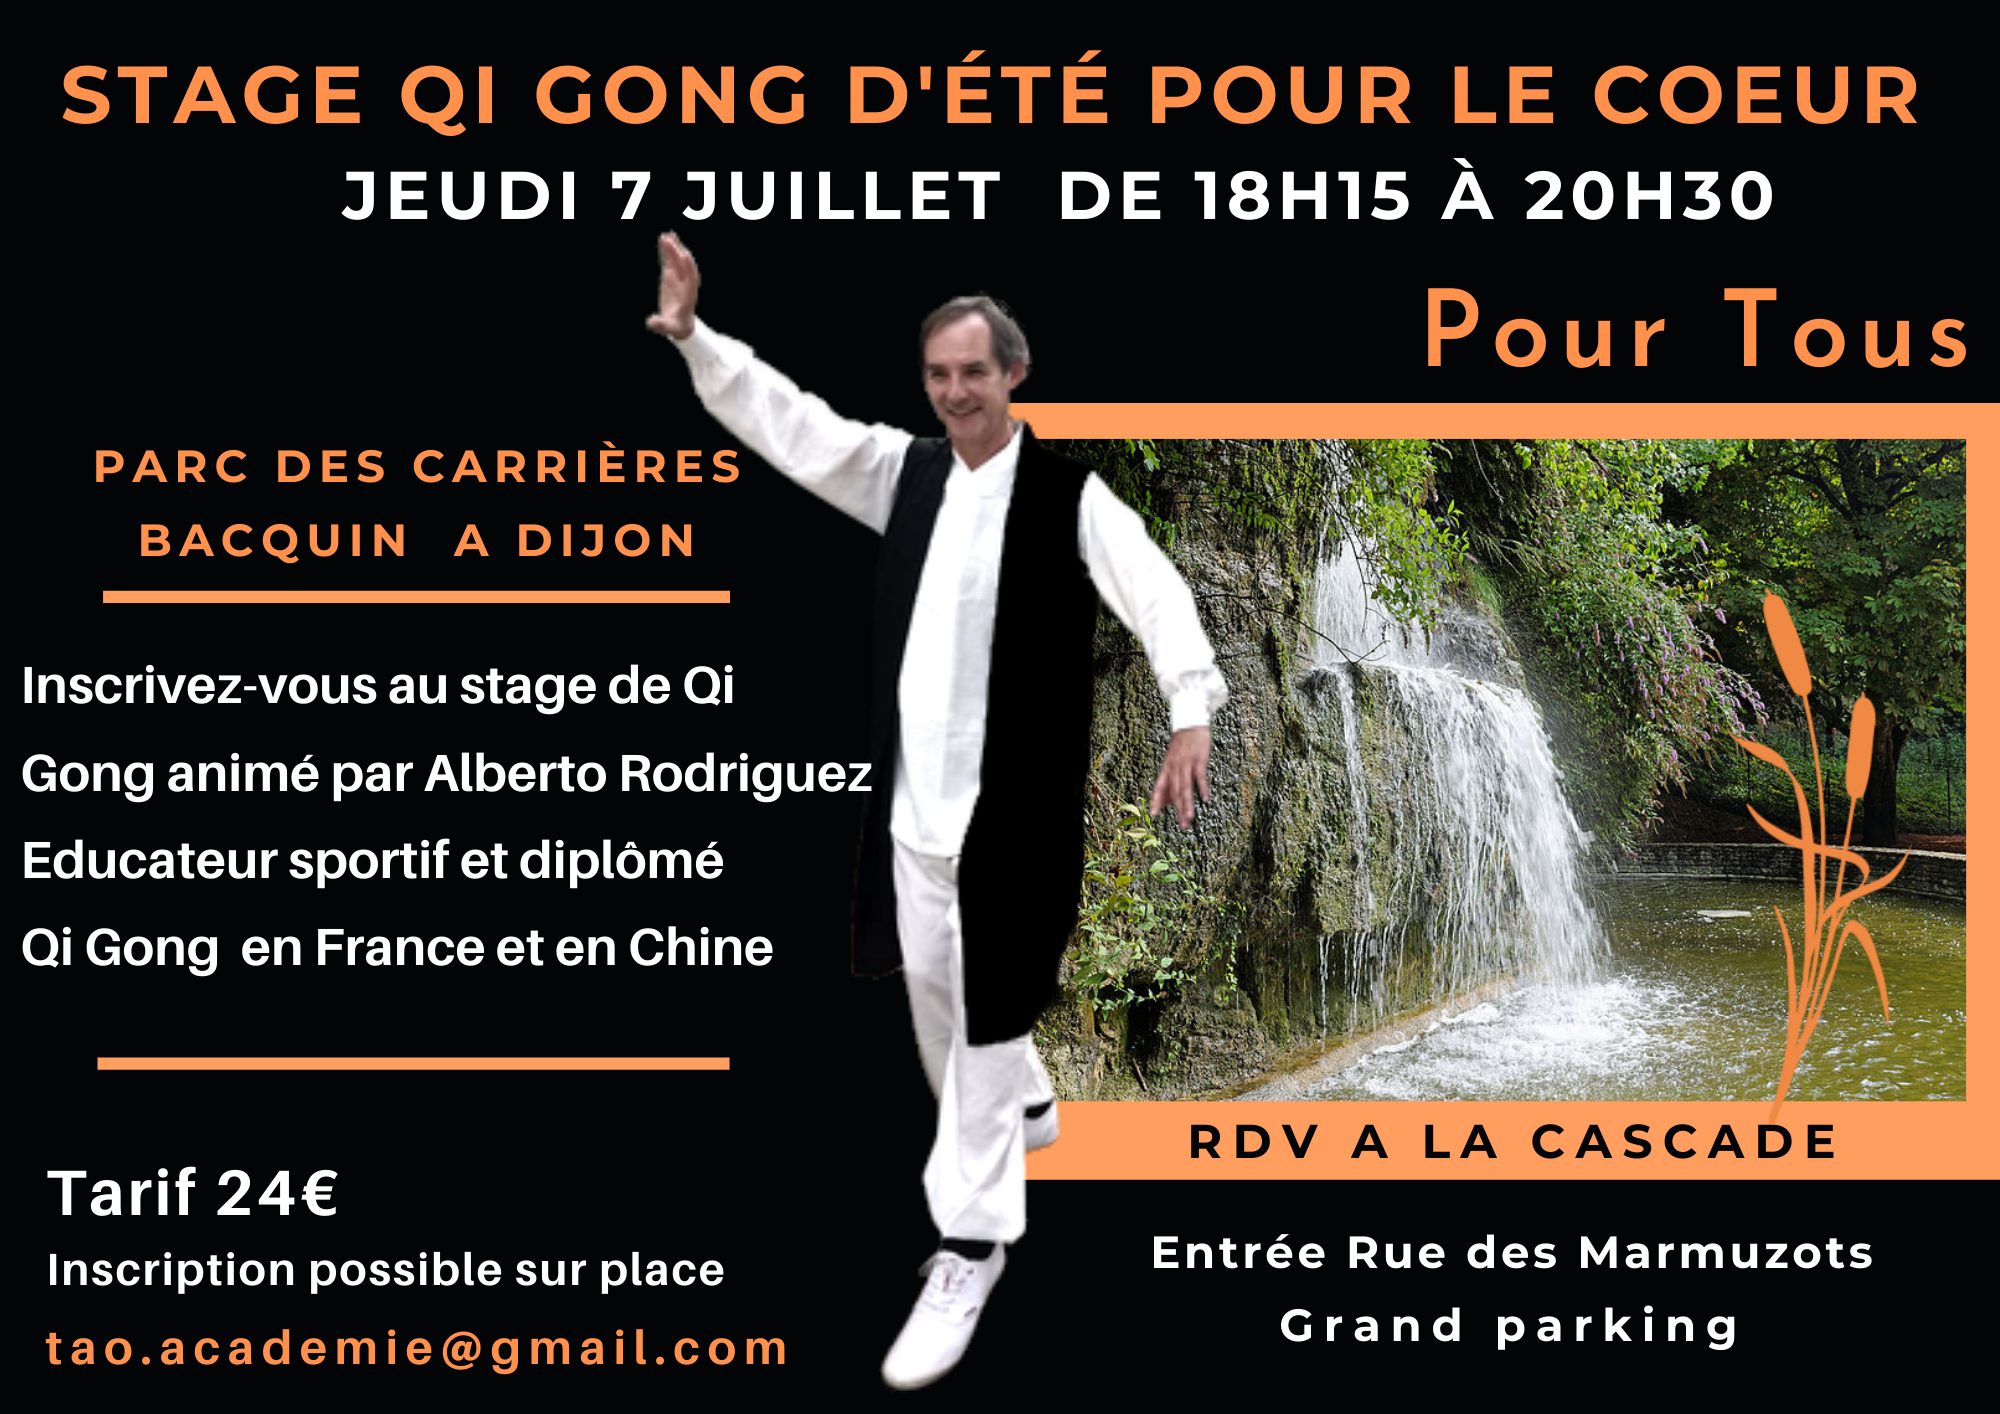 STAGE QI GONG POUR LE COEUR